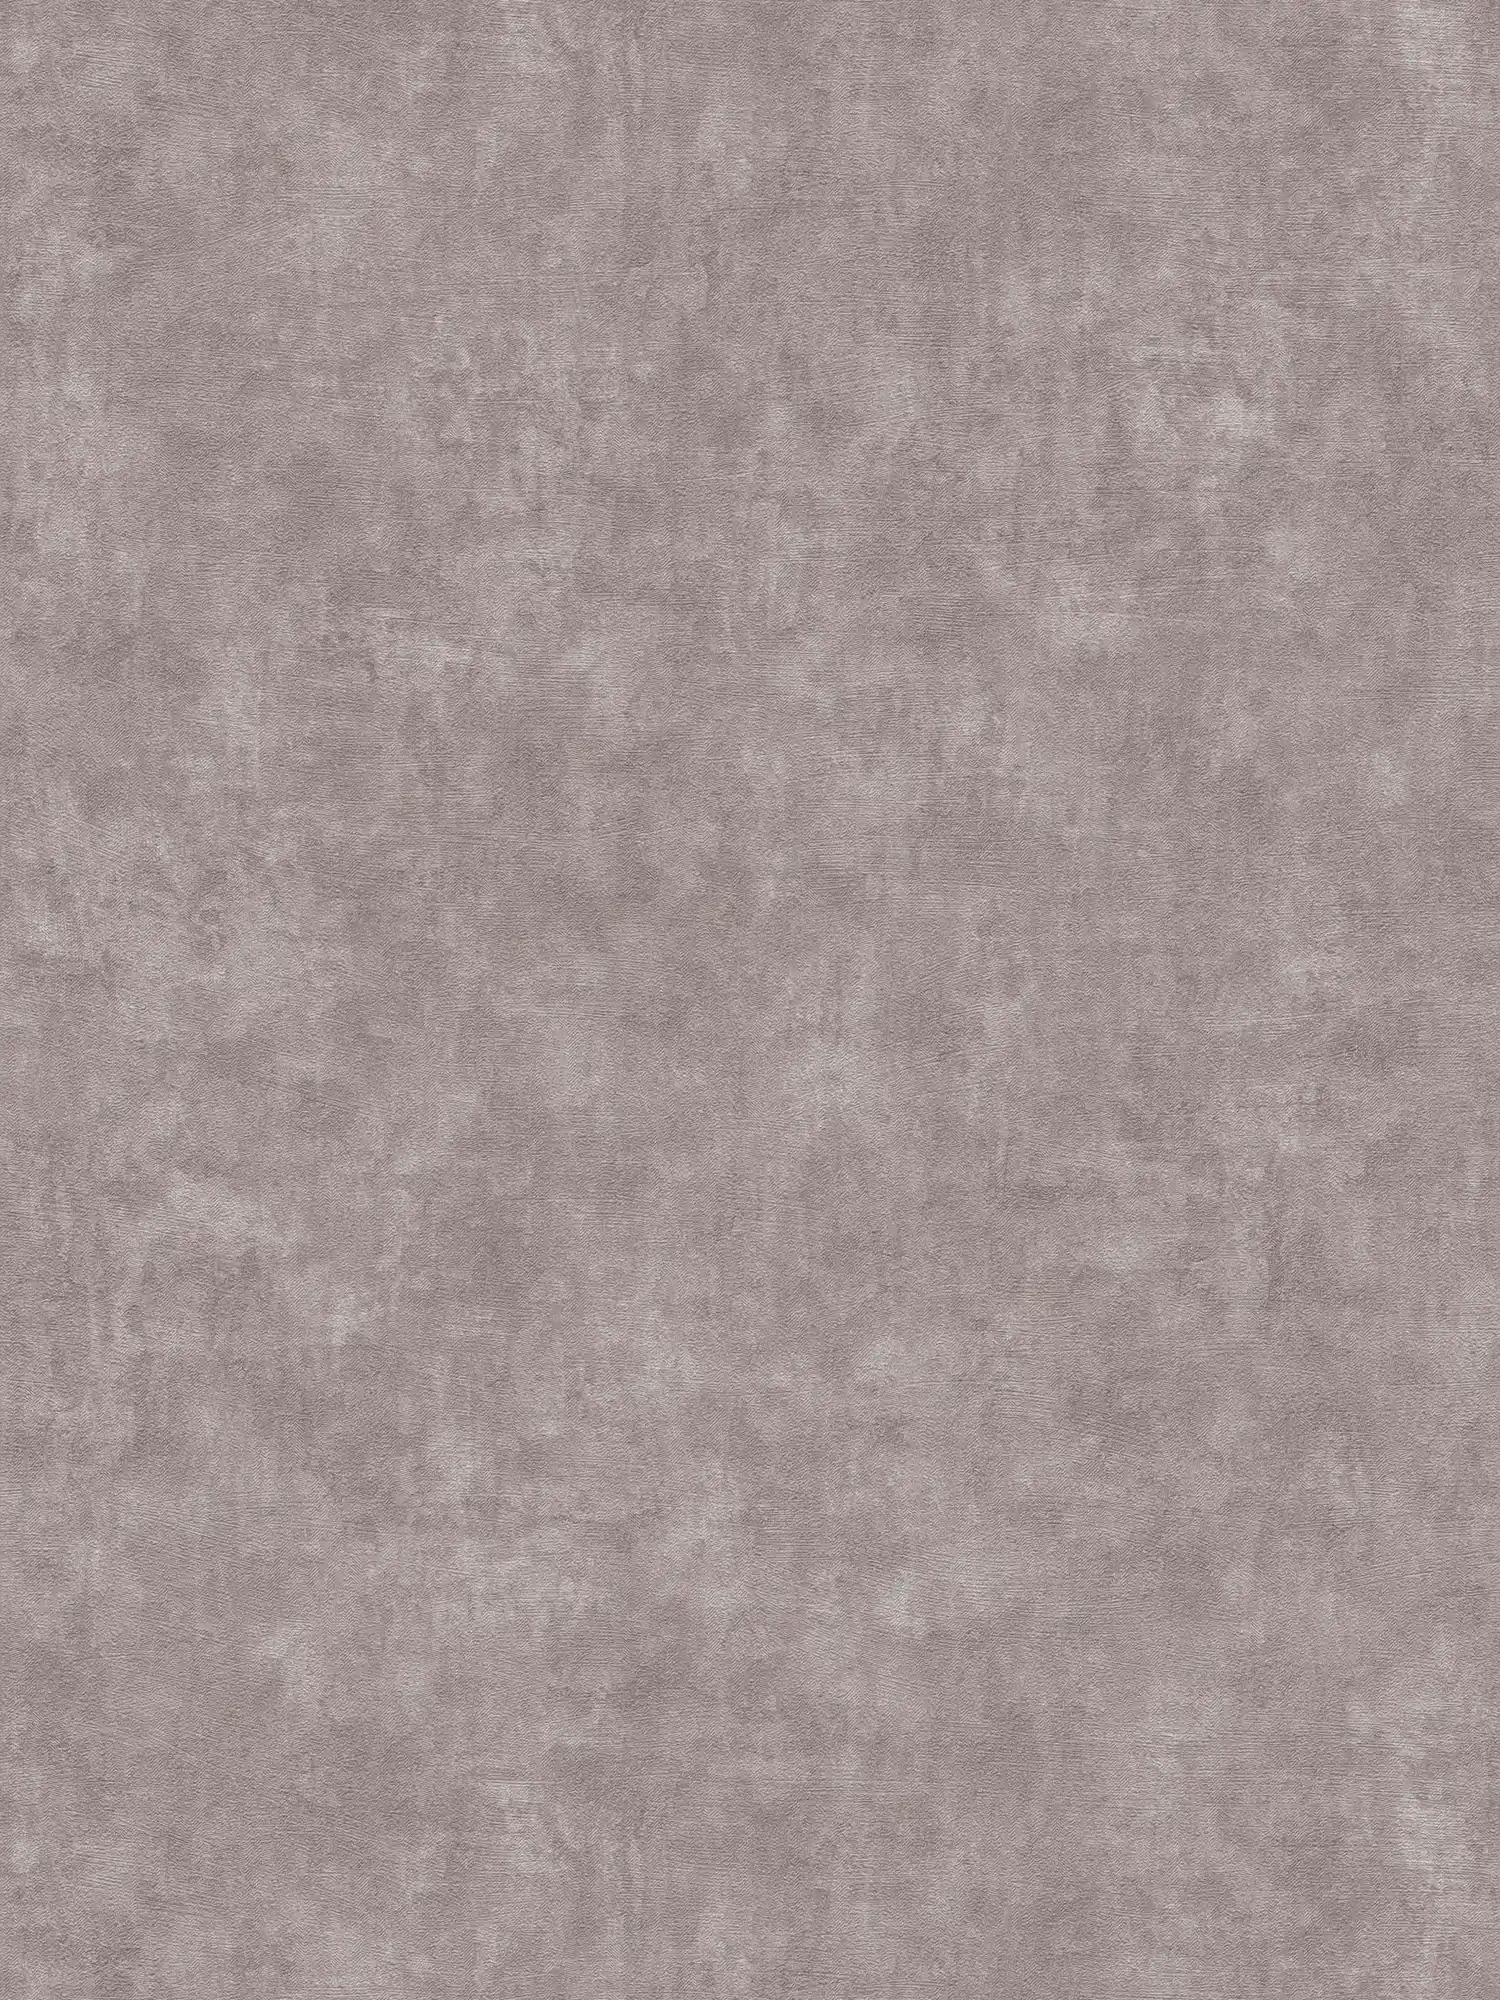 Non-woven wallpaper plains with concrete look and structure - grey
